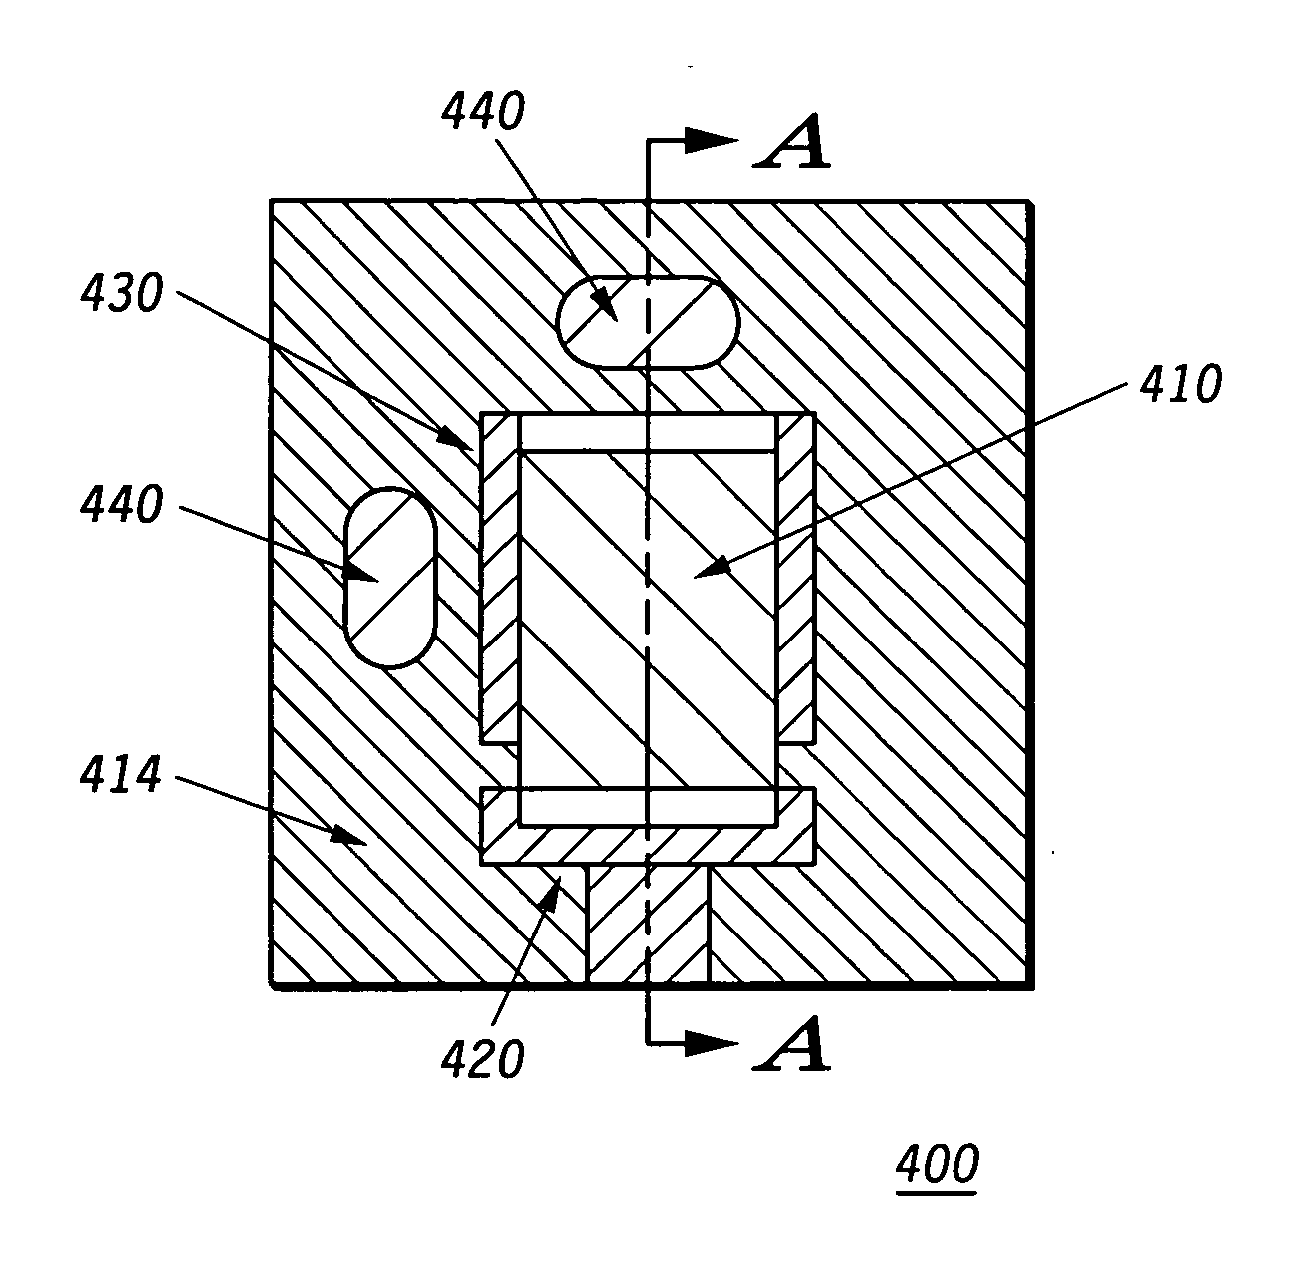 Electrical circuit apparatus and methods for assembling same